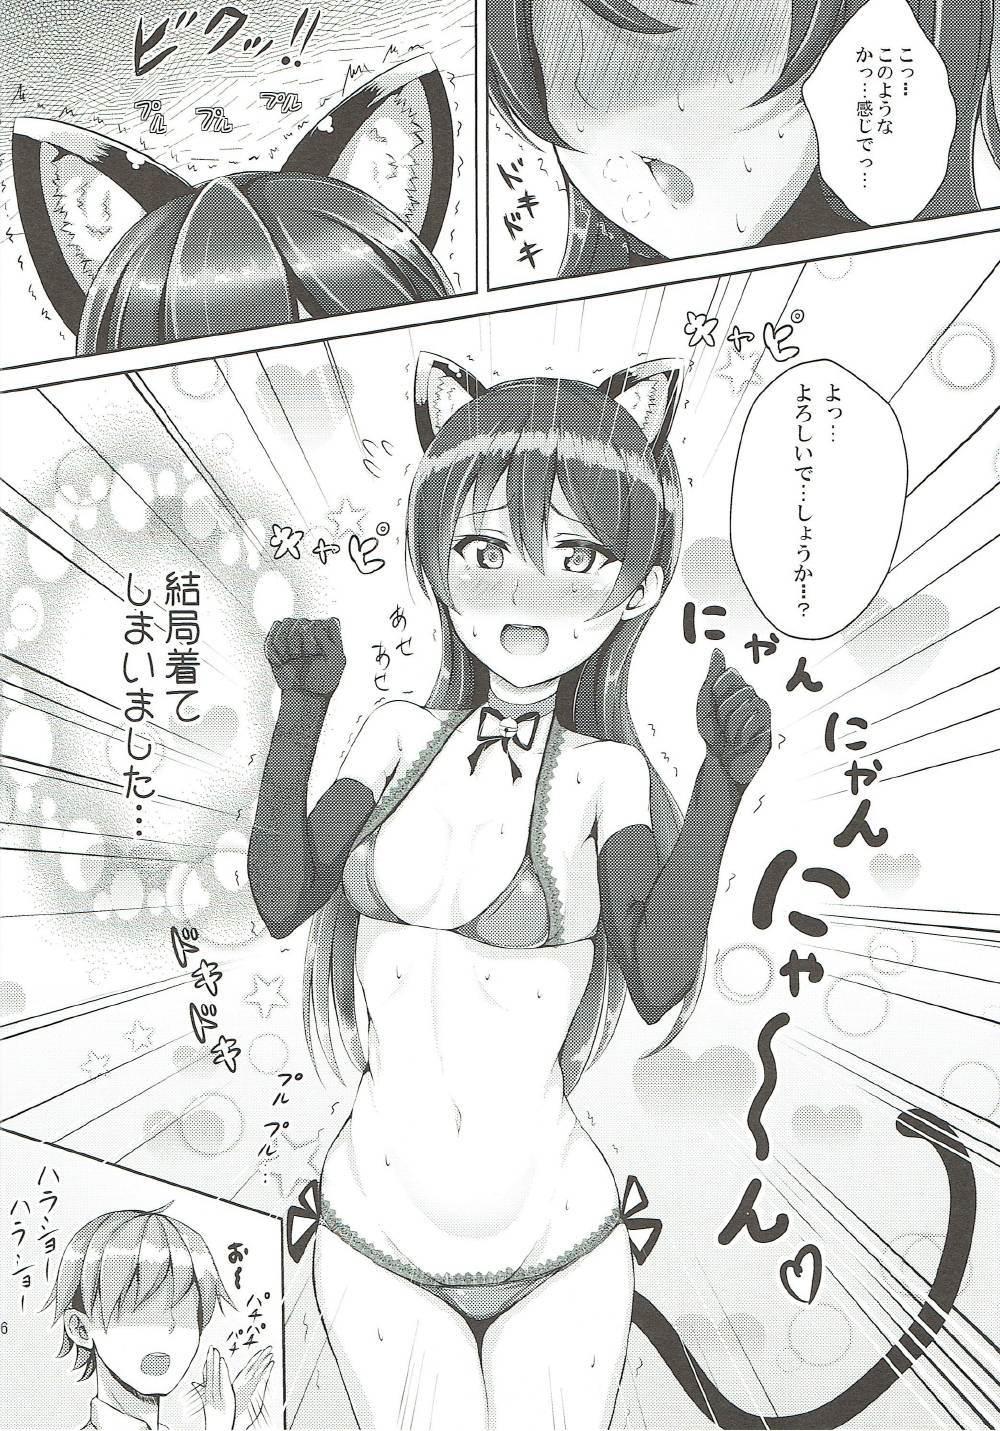 Ano Umi-chan to Nyannyan - Love live Hotel - Page 4